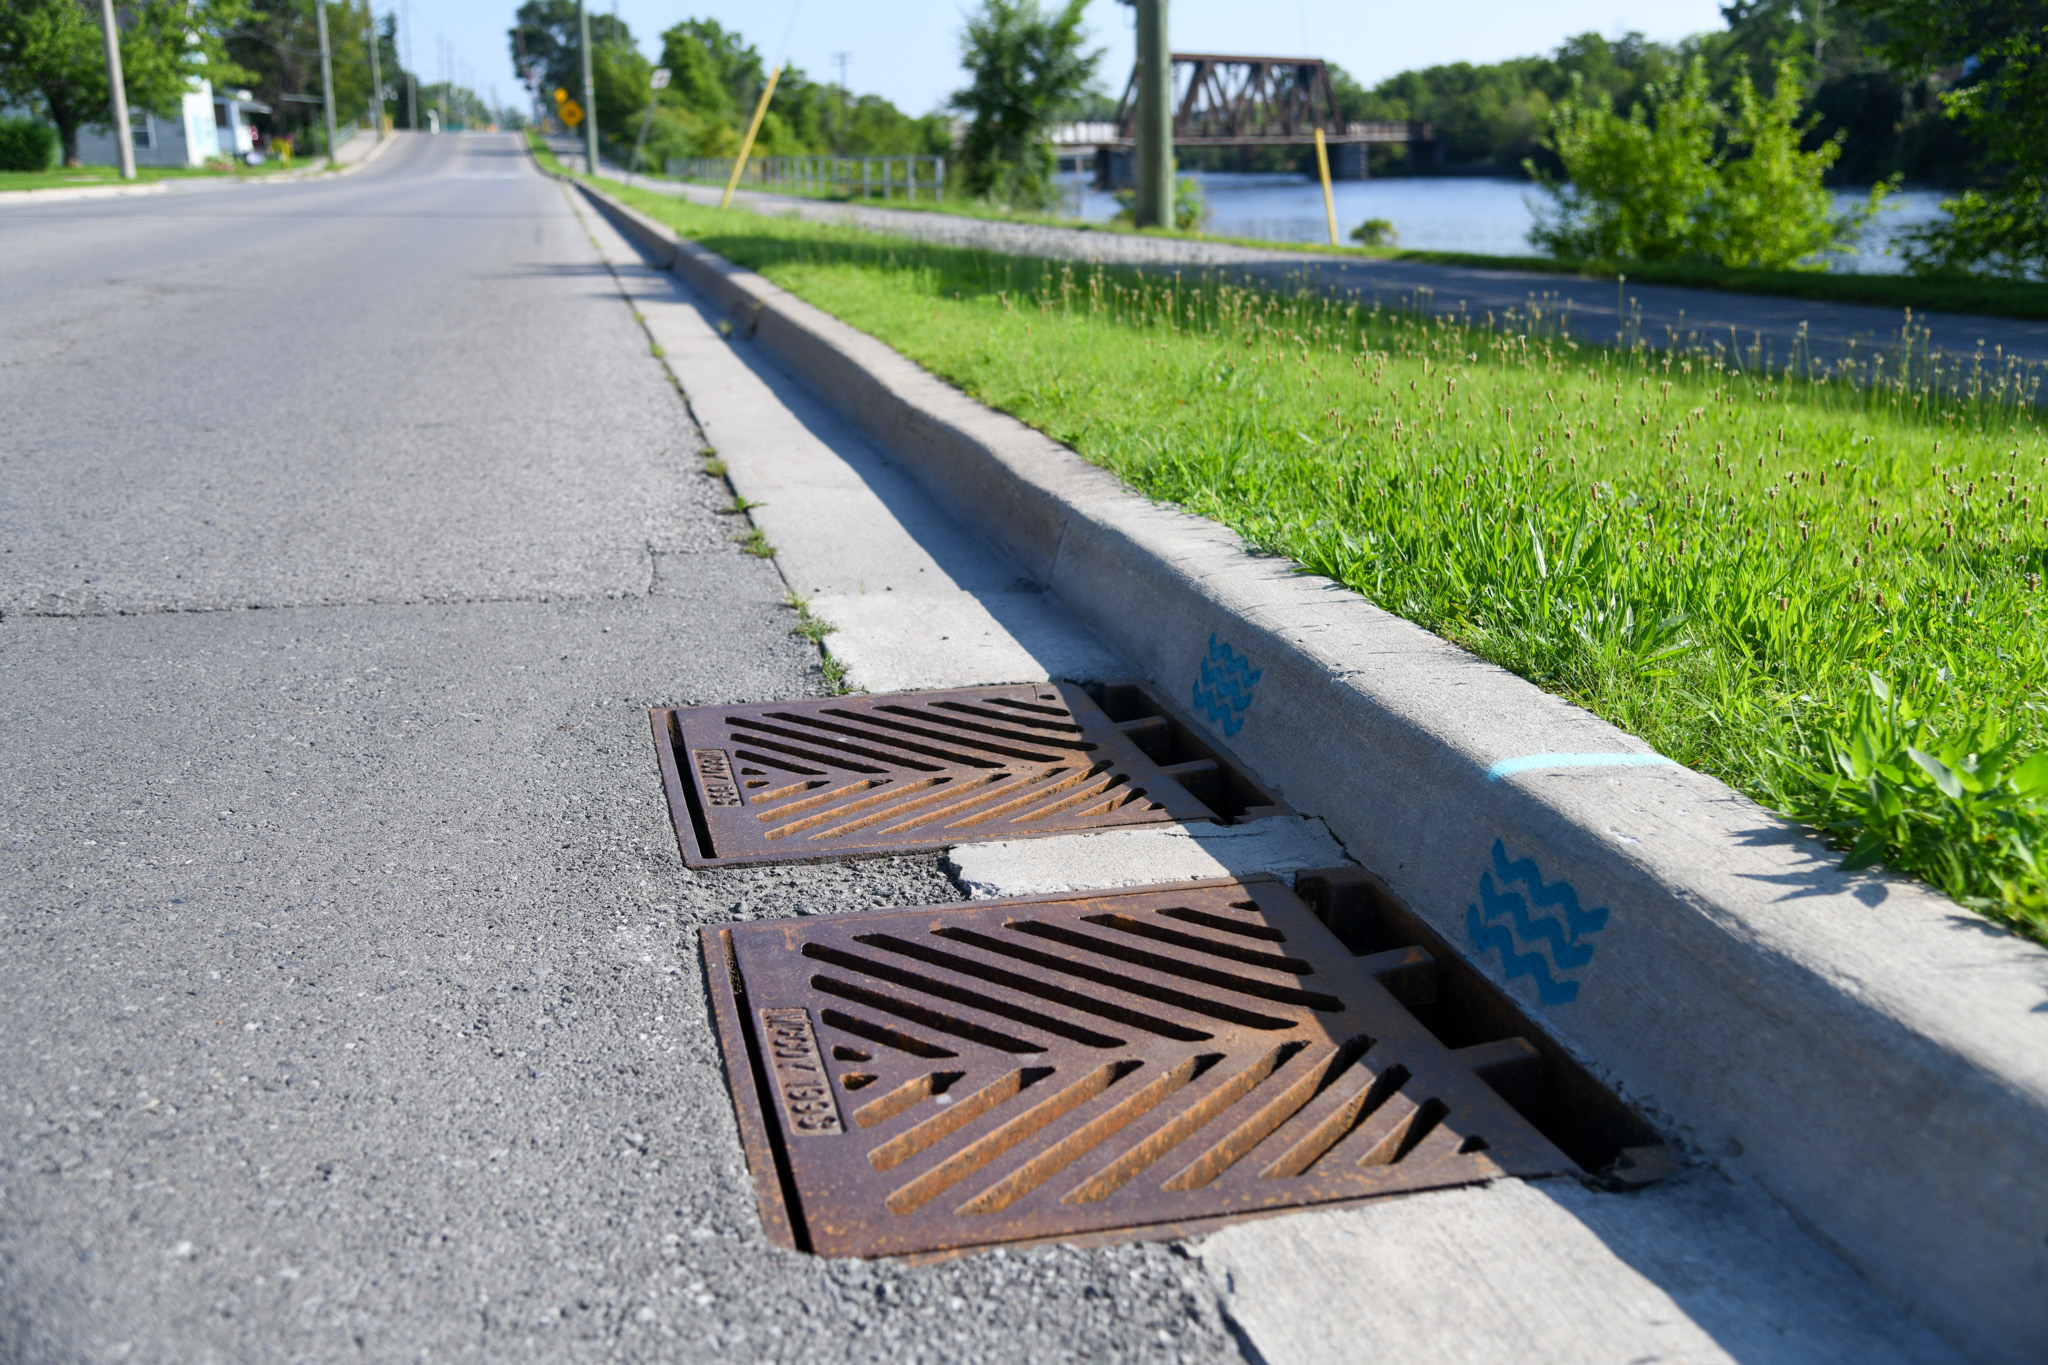 Photo of storm drains with a blue wave painted on the curb above them.